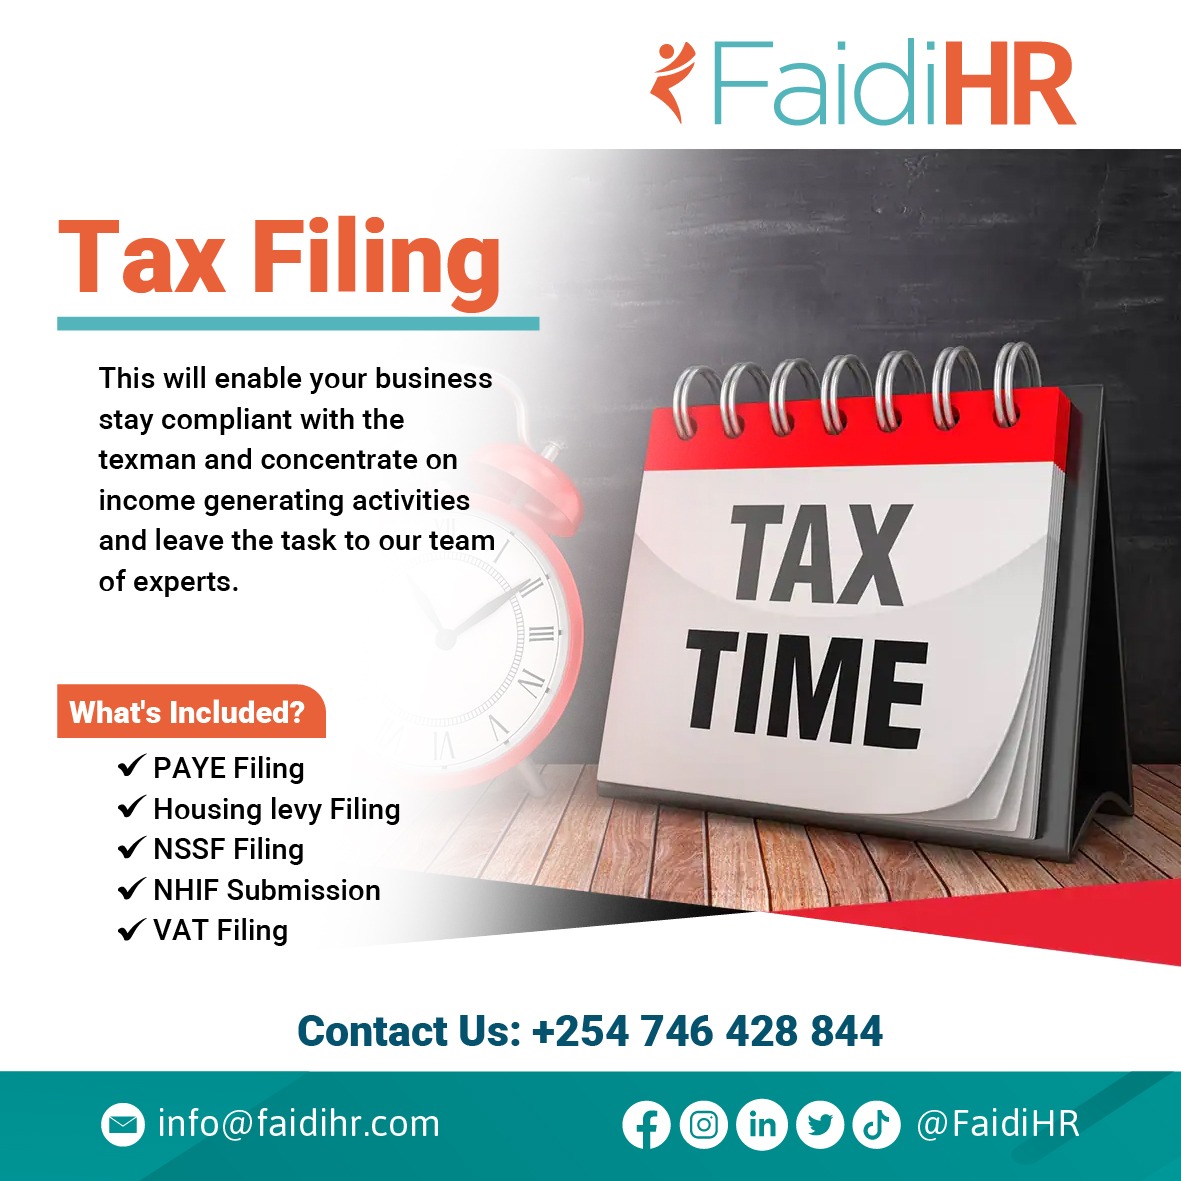 Let us handle the numbers, so you can focus on what matters most.

Contact us at 0746428844 or email info@faidihr.com for stress-free tax filing and expert financial support.

#Compliance #Taxconsultants #KRA #HouseLevy #PAYE #NSSF #NHIF #VAT #mpesa